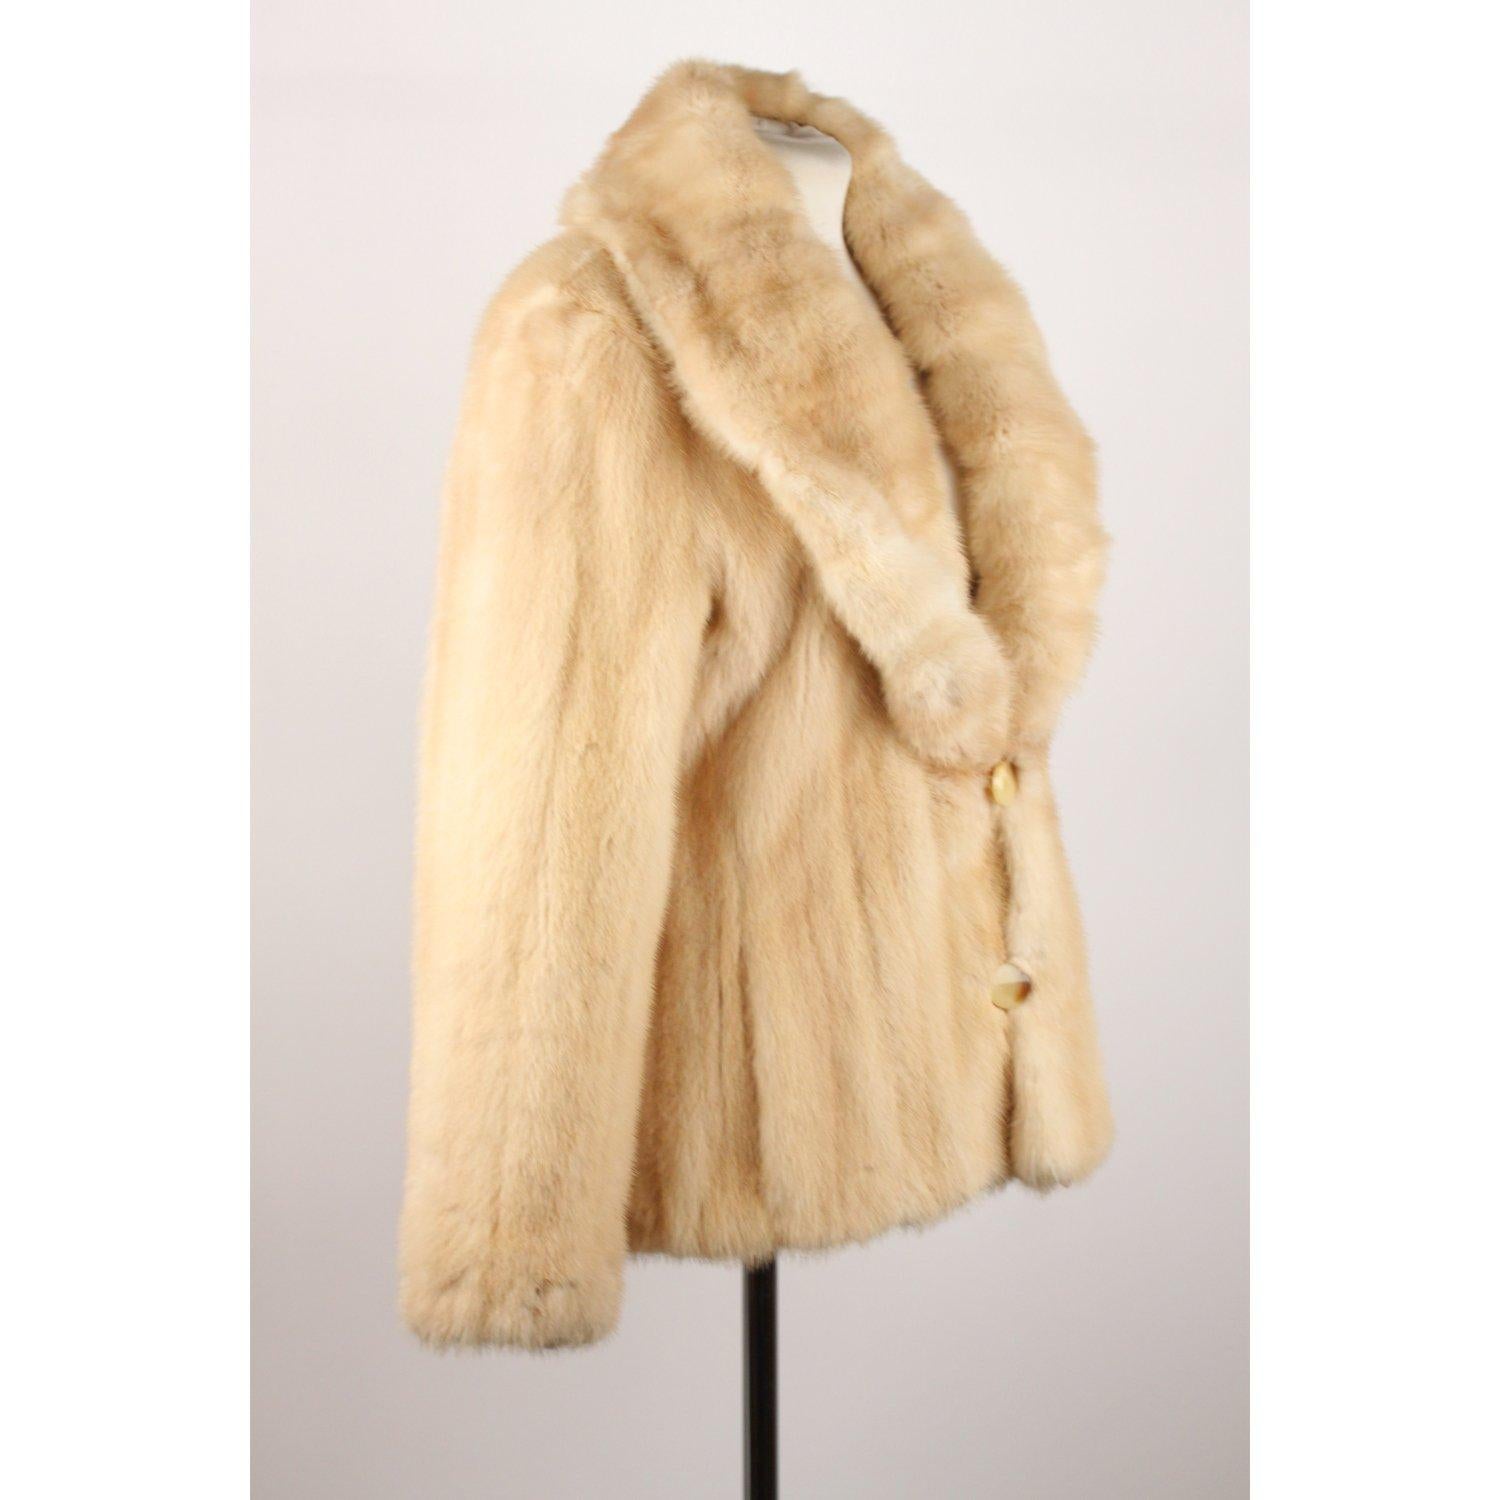 MATERIAL: Fabric COLOR: Beige MODEL: Jacket GENDER: Women SIZE: Small COUNTRY OF MANUFACTURE: Italy Condition CONDITION DETAILS: A :EXCELLENT CONDITION - Used once or twice. Looks mint. Imperceptible signs of wear Measurements MEASUREMENTS: SHOULDER